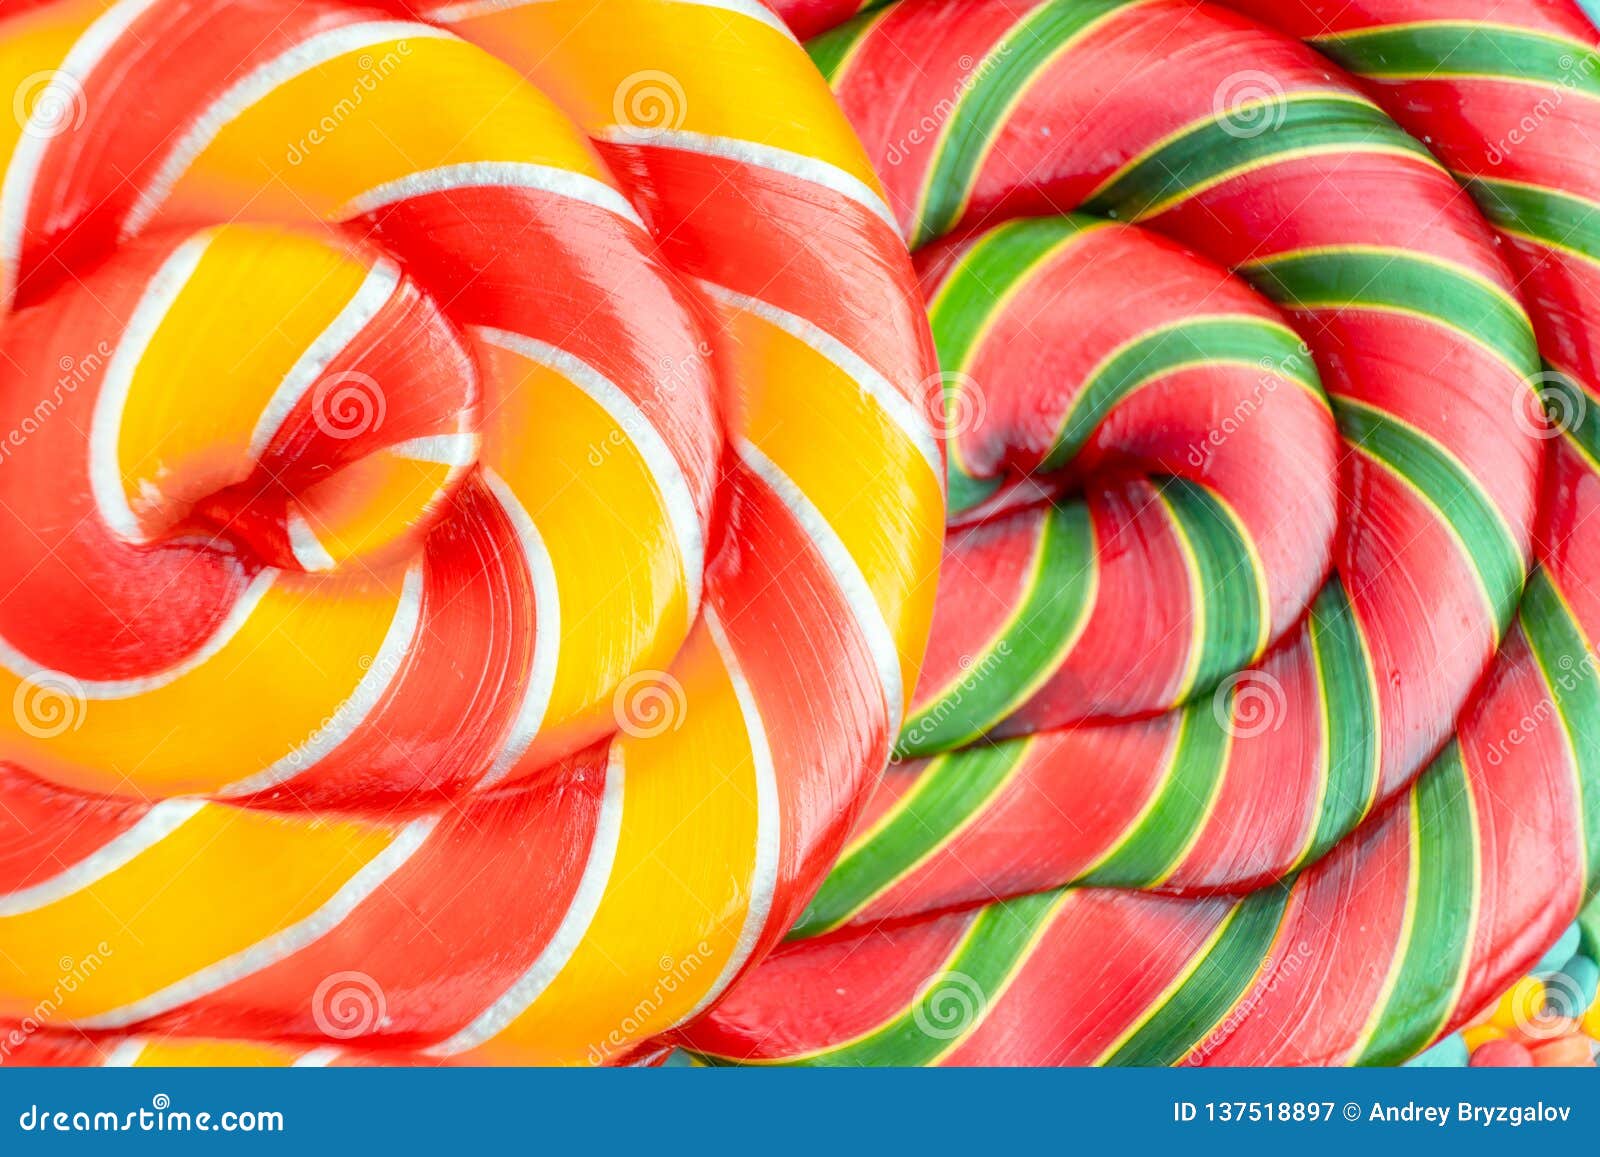 Backdrop from Mix Colorful Candy Sweet Closeup Stock Image - Image of ...